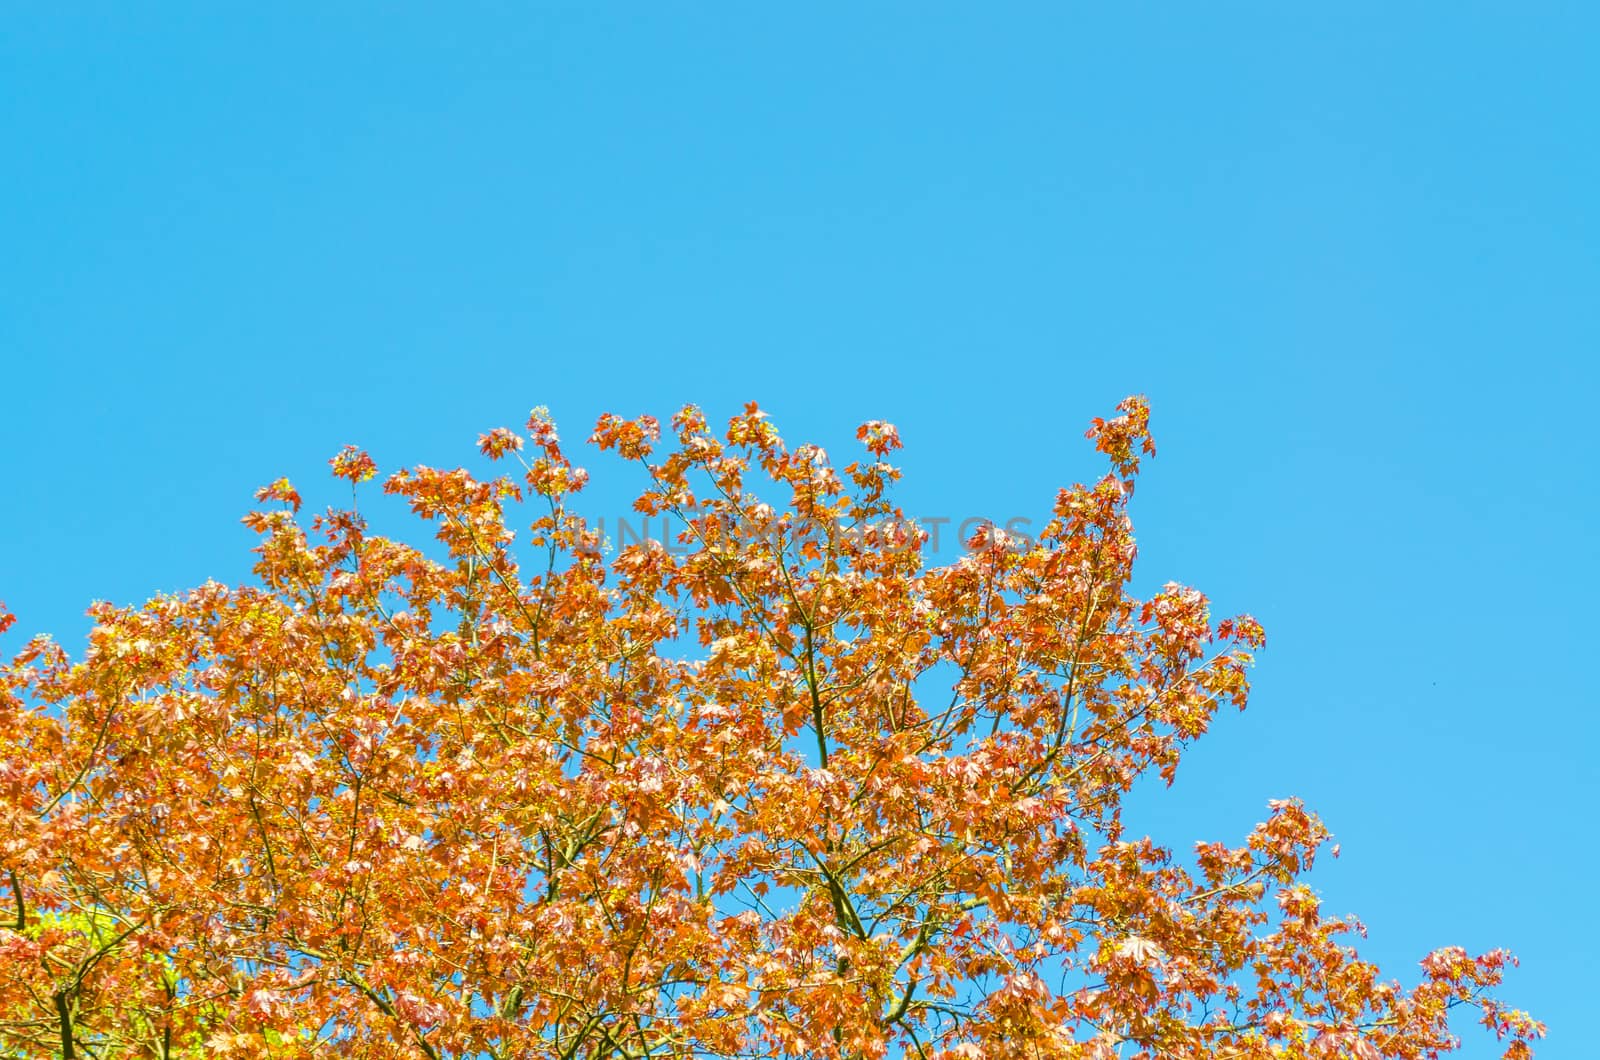 Top of the tree, leaves autumn-colored against a blue sky
